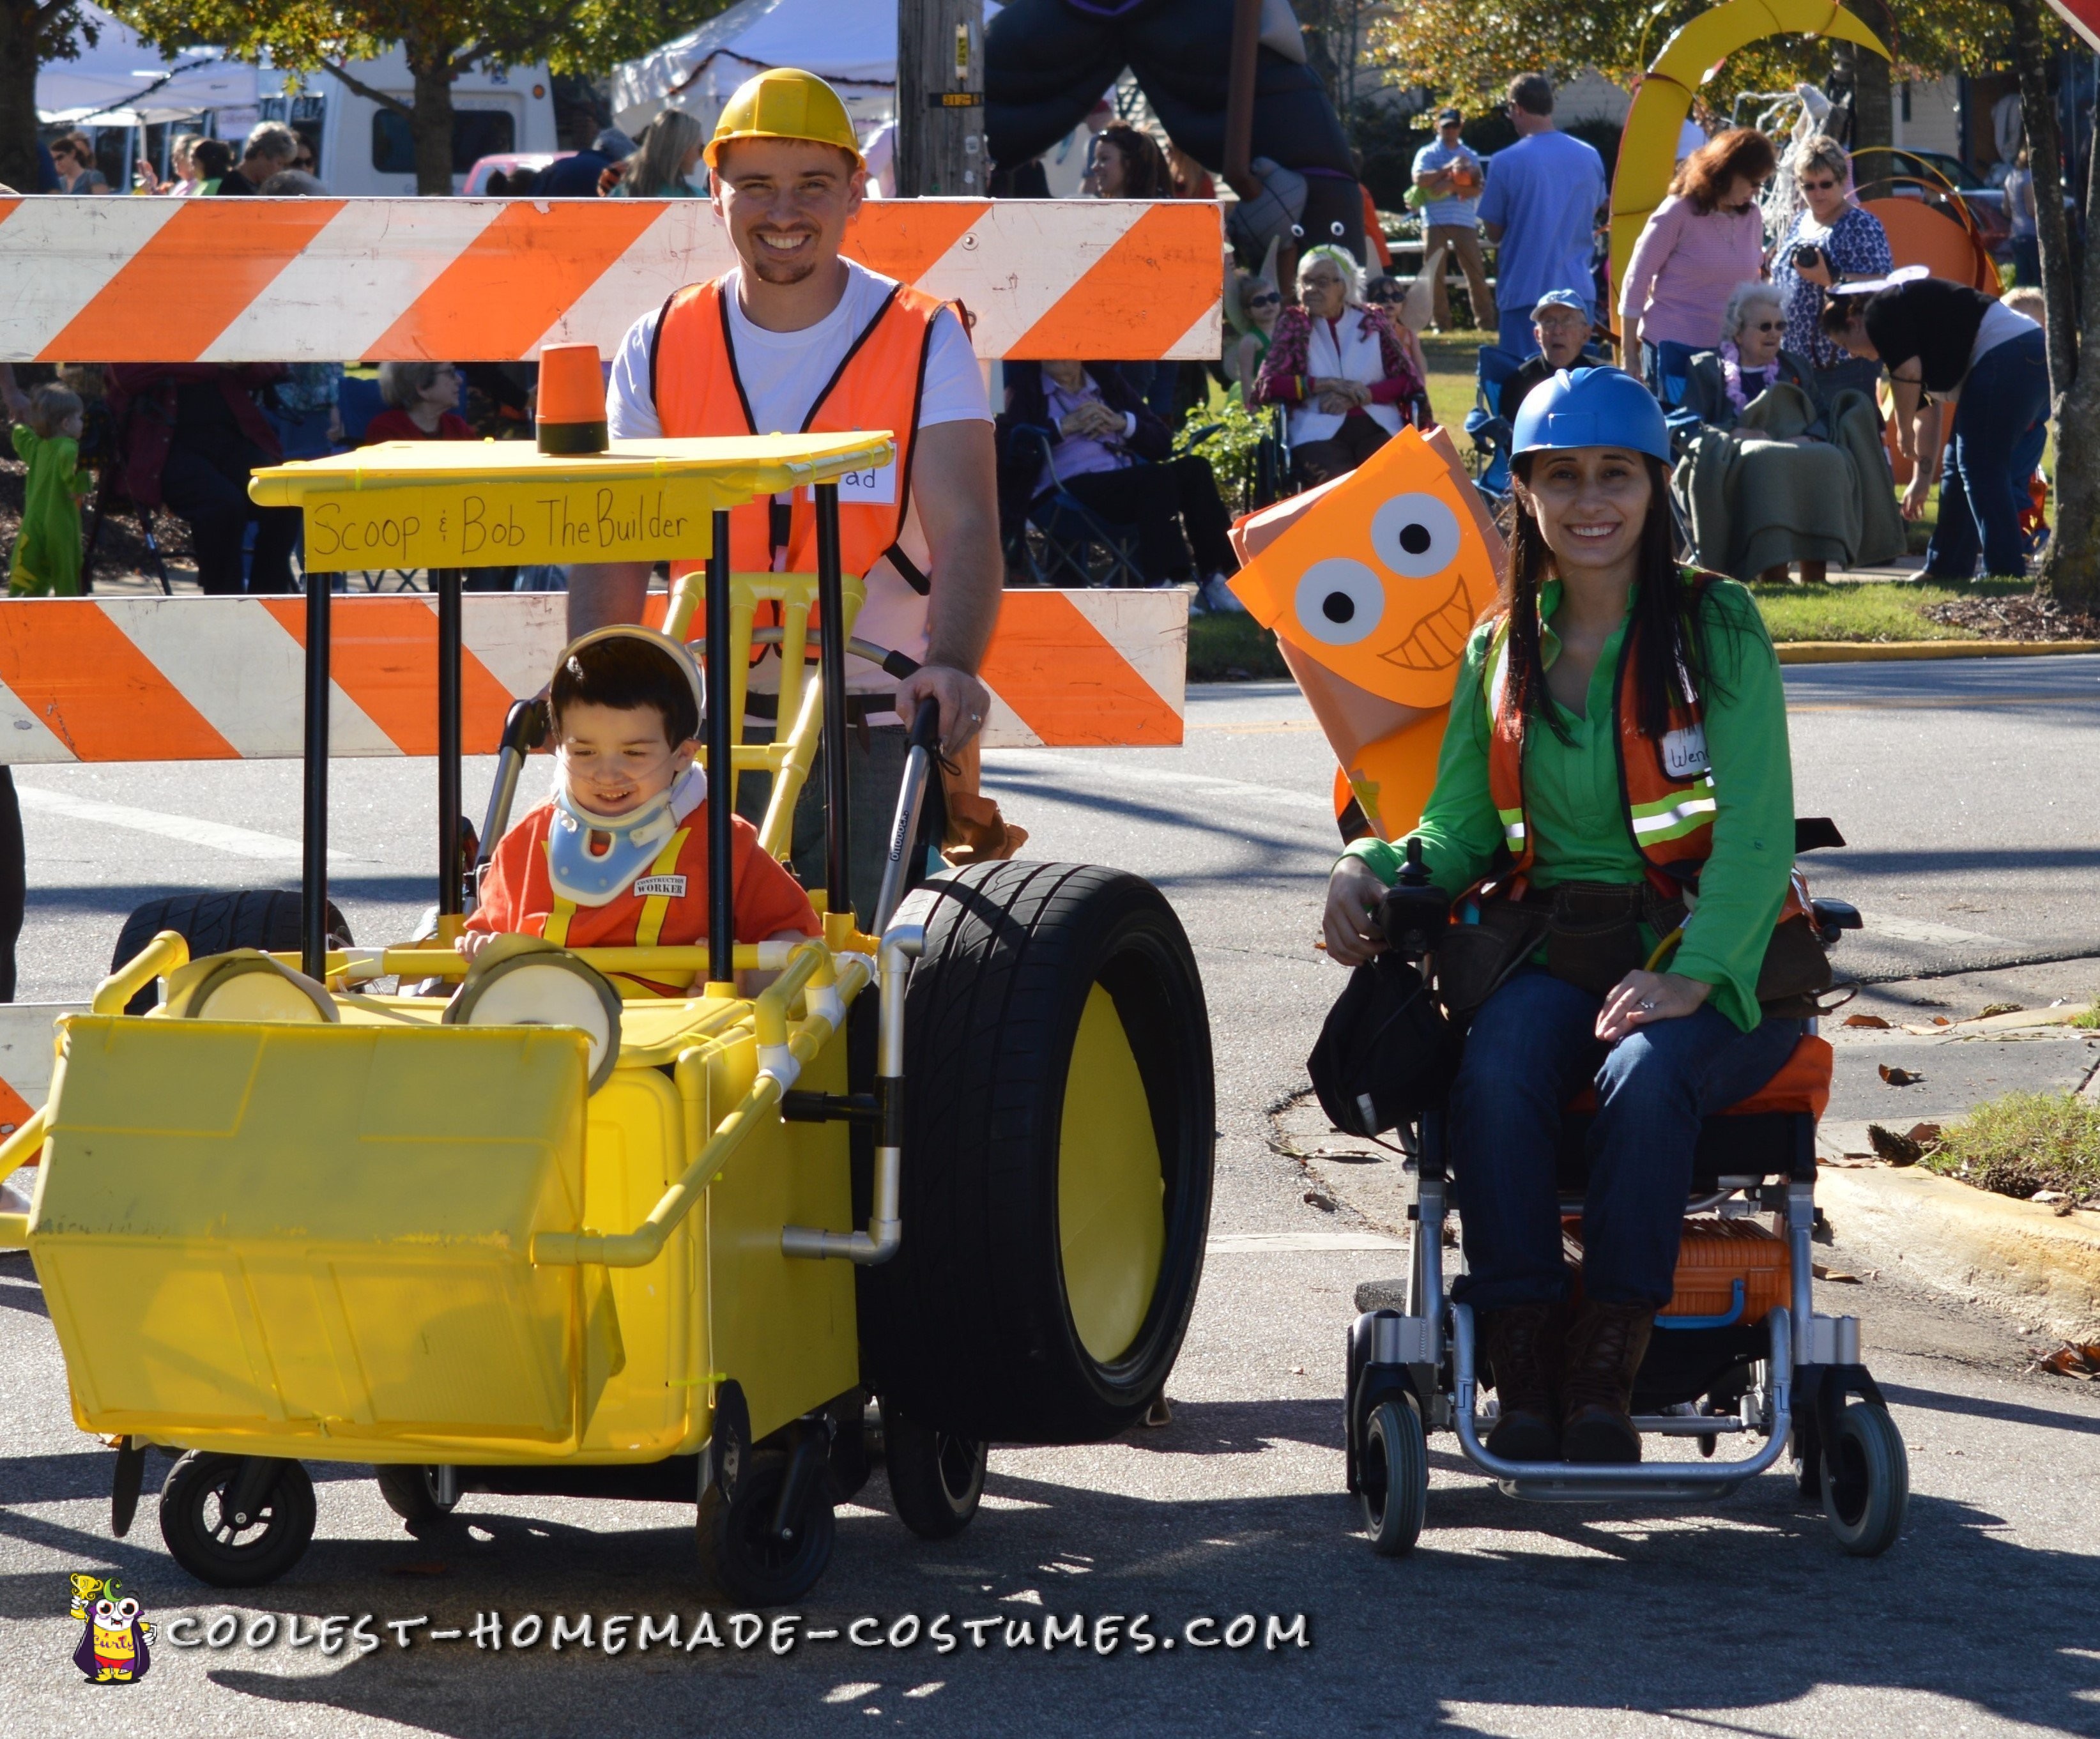 The Amazing Scoop and Bob the Builder Costume